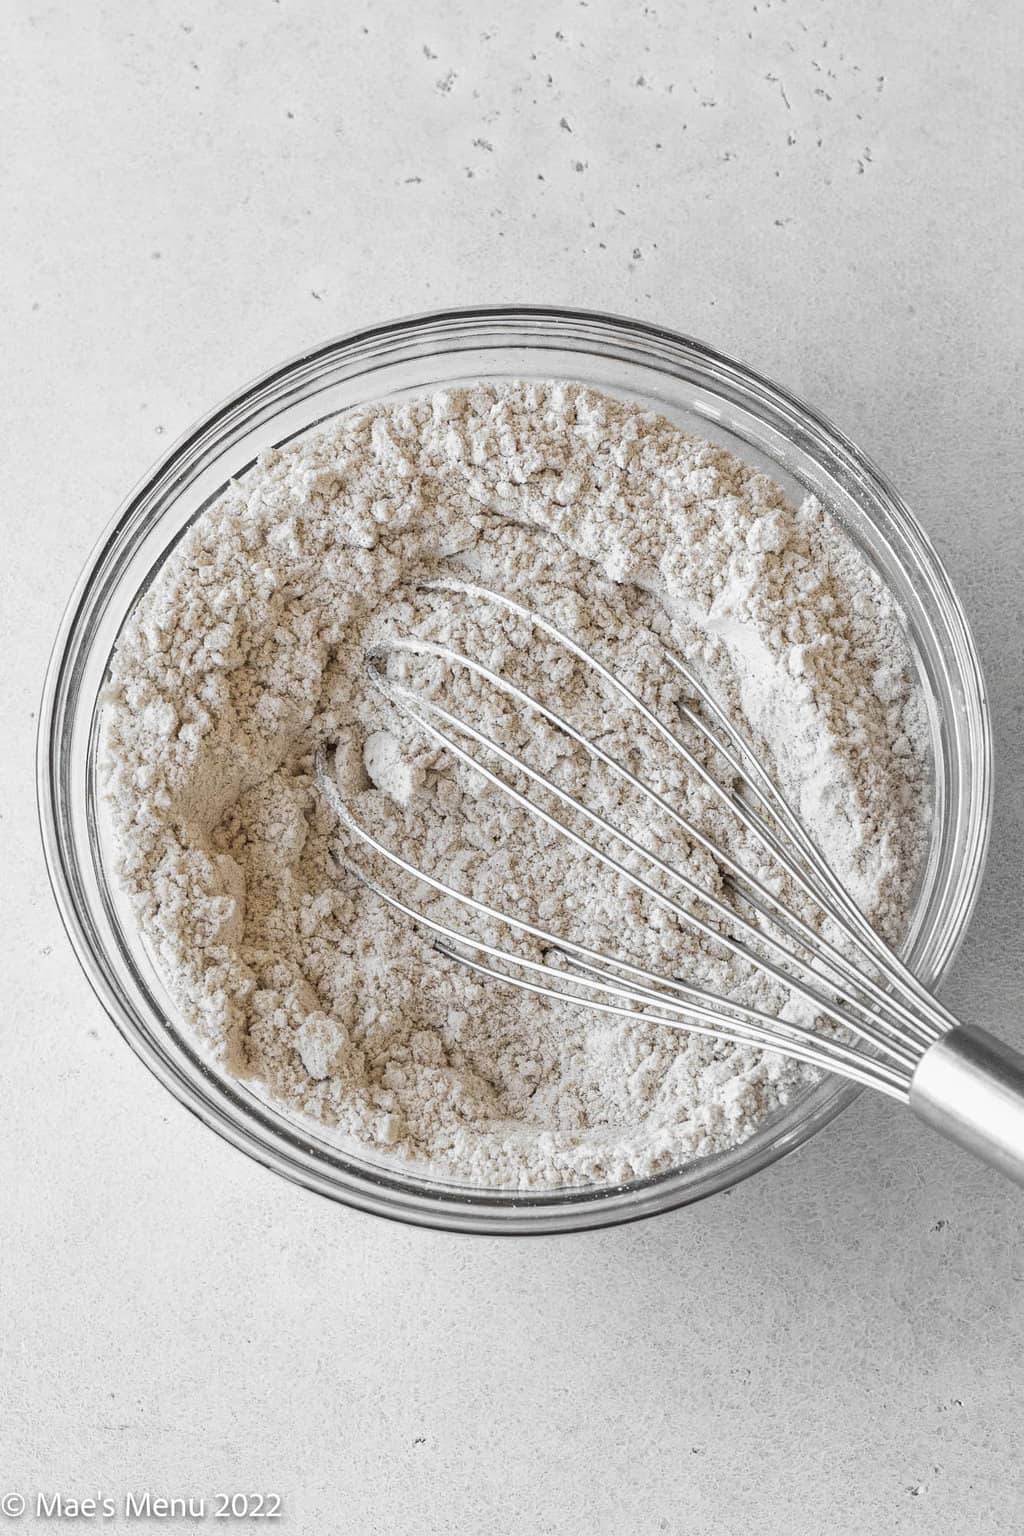 A whisking bowl of flour and seasonings with a whisk.